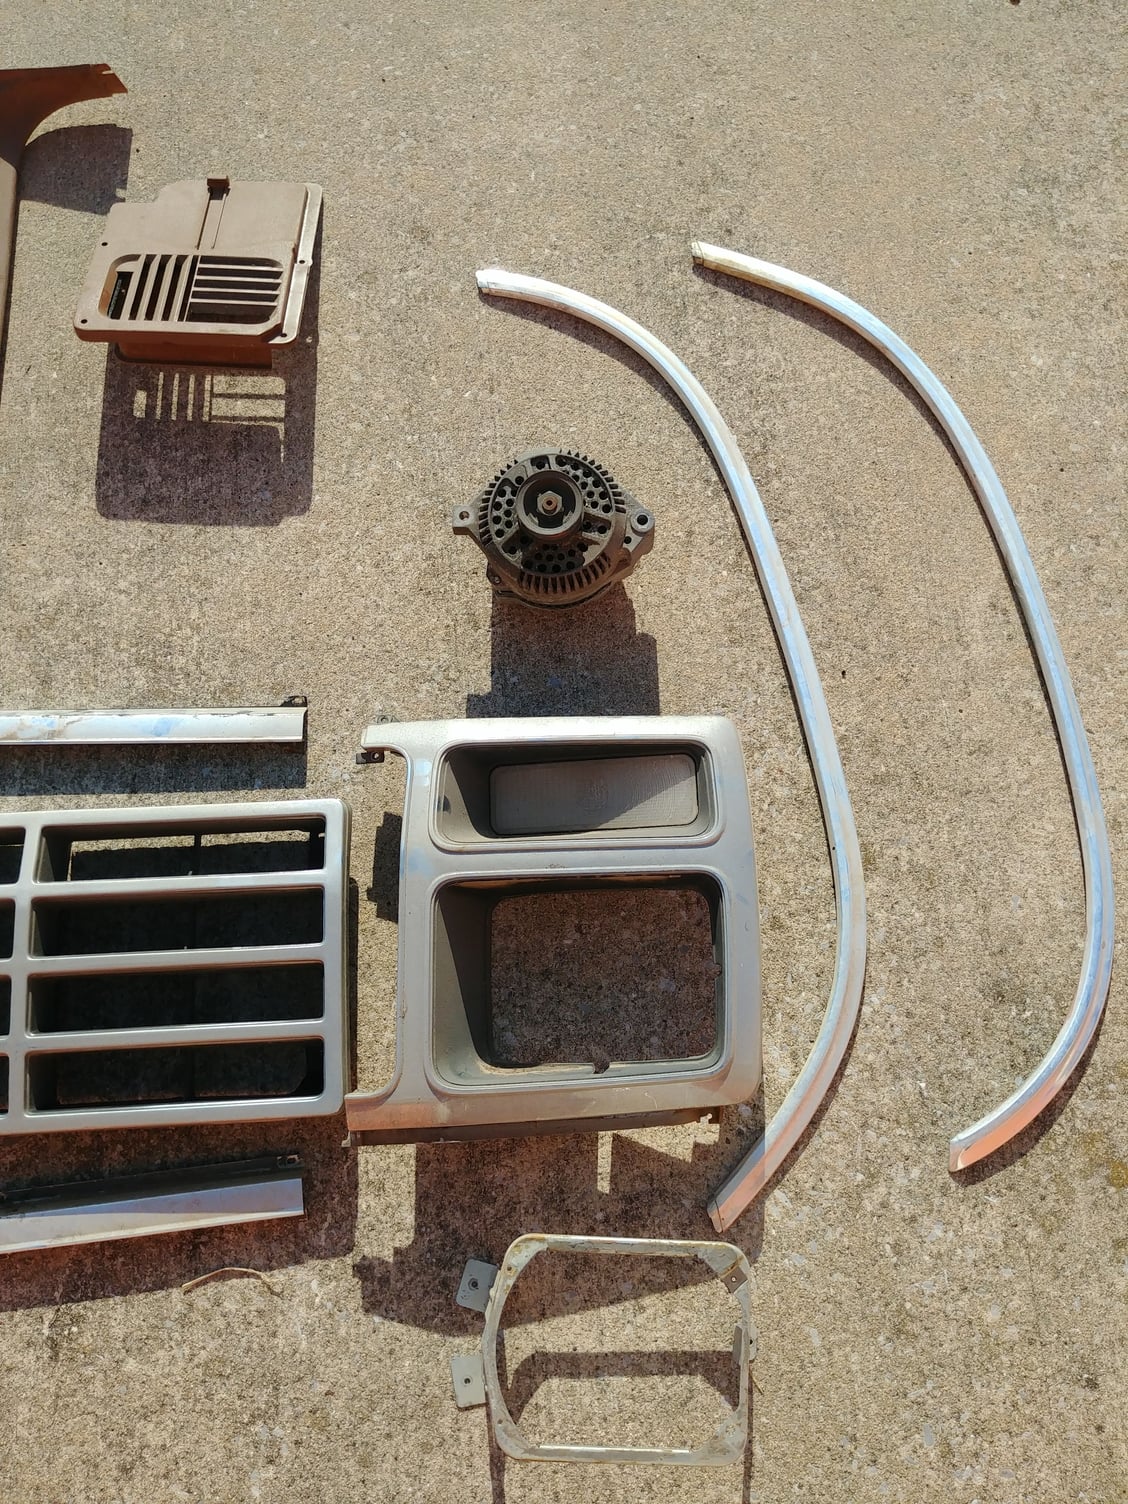 Miscellaneous - 7th Gen F-150 Grill, Headlight Bezels, Interior Kick Panel Vents - Used - 1980 to 1986 Ford F-150 - Moore, OK 73160, United States